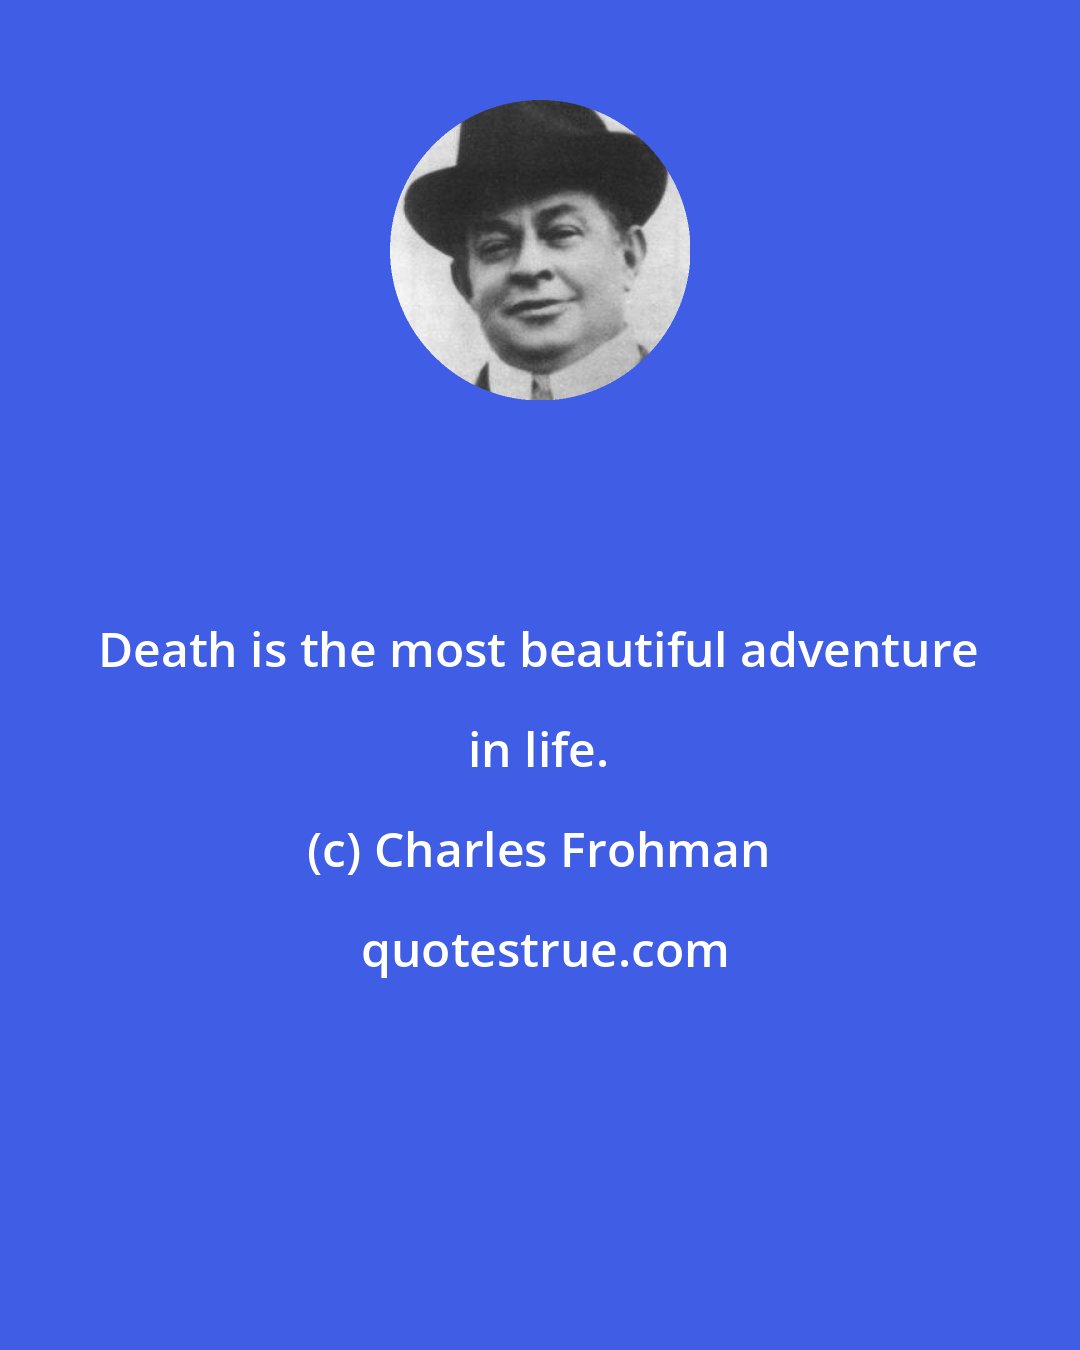 Charles Frohman: Death is the most beautiful adventure in life.